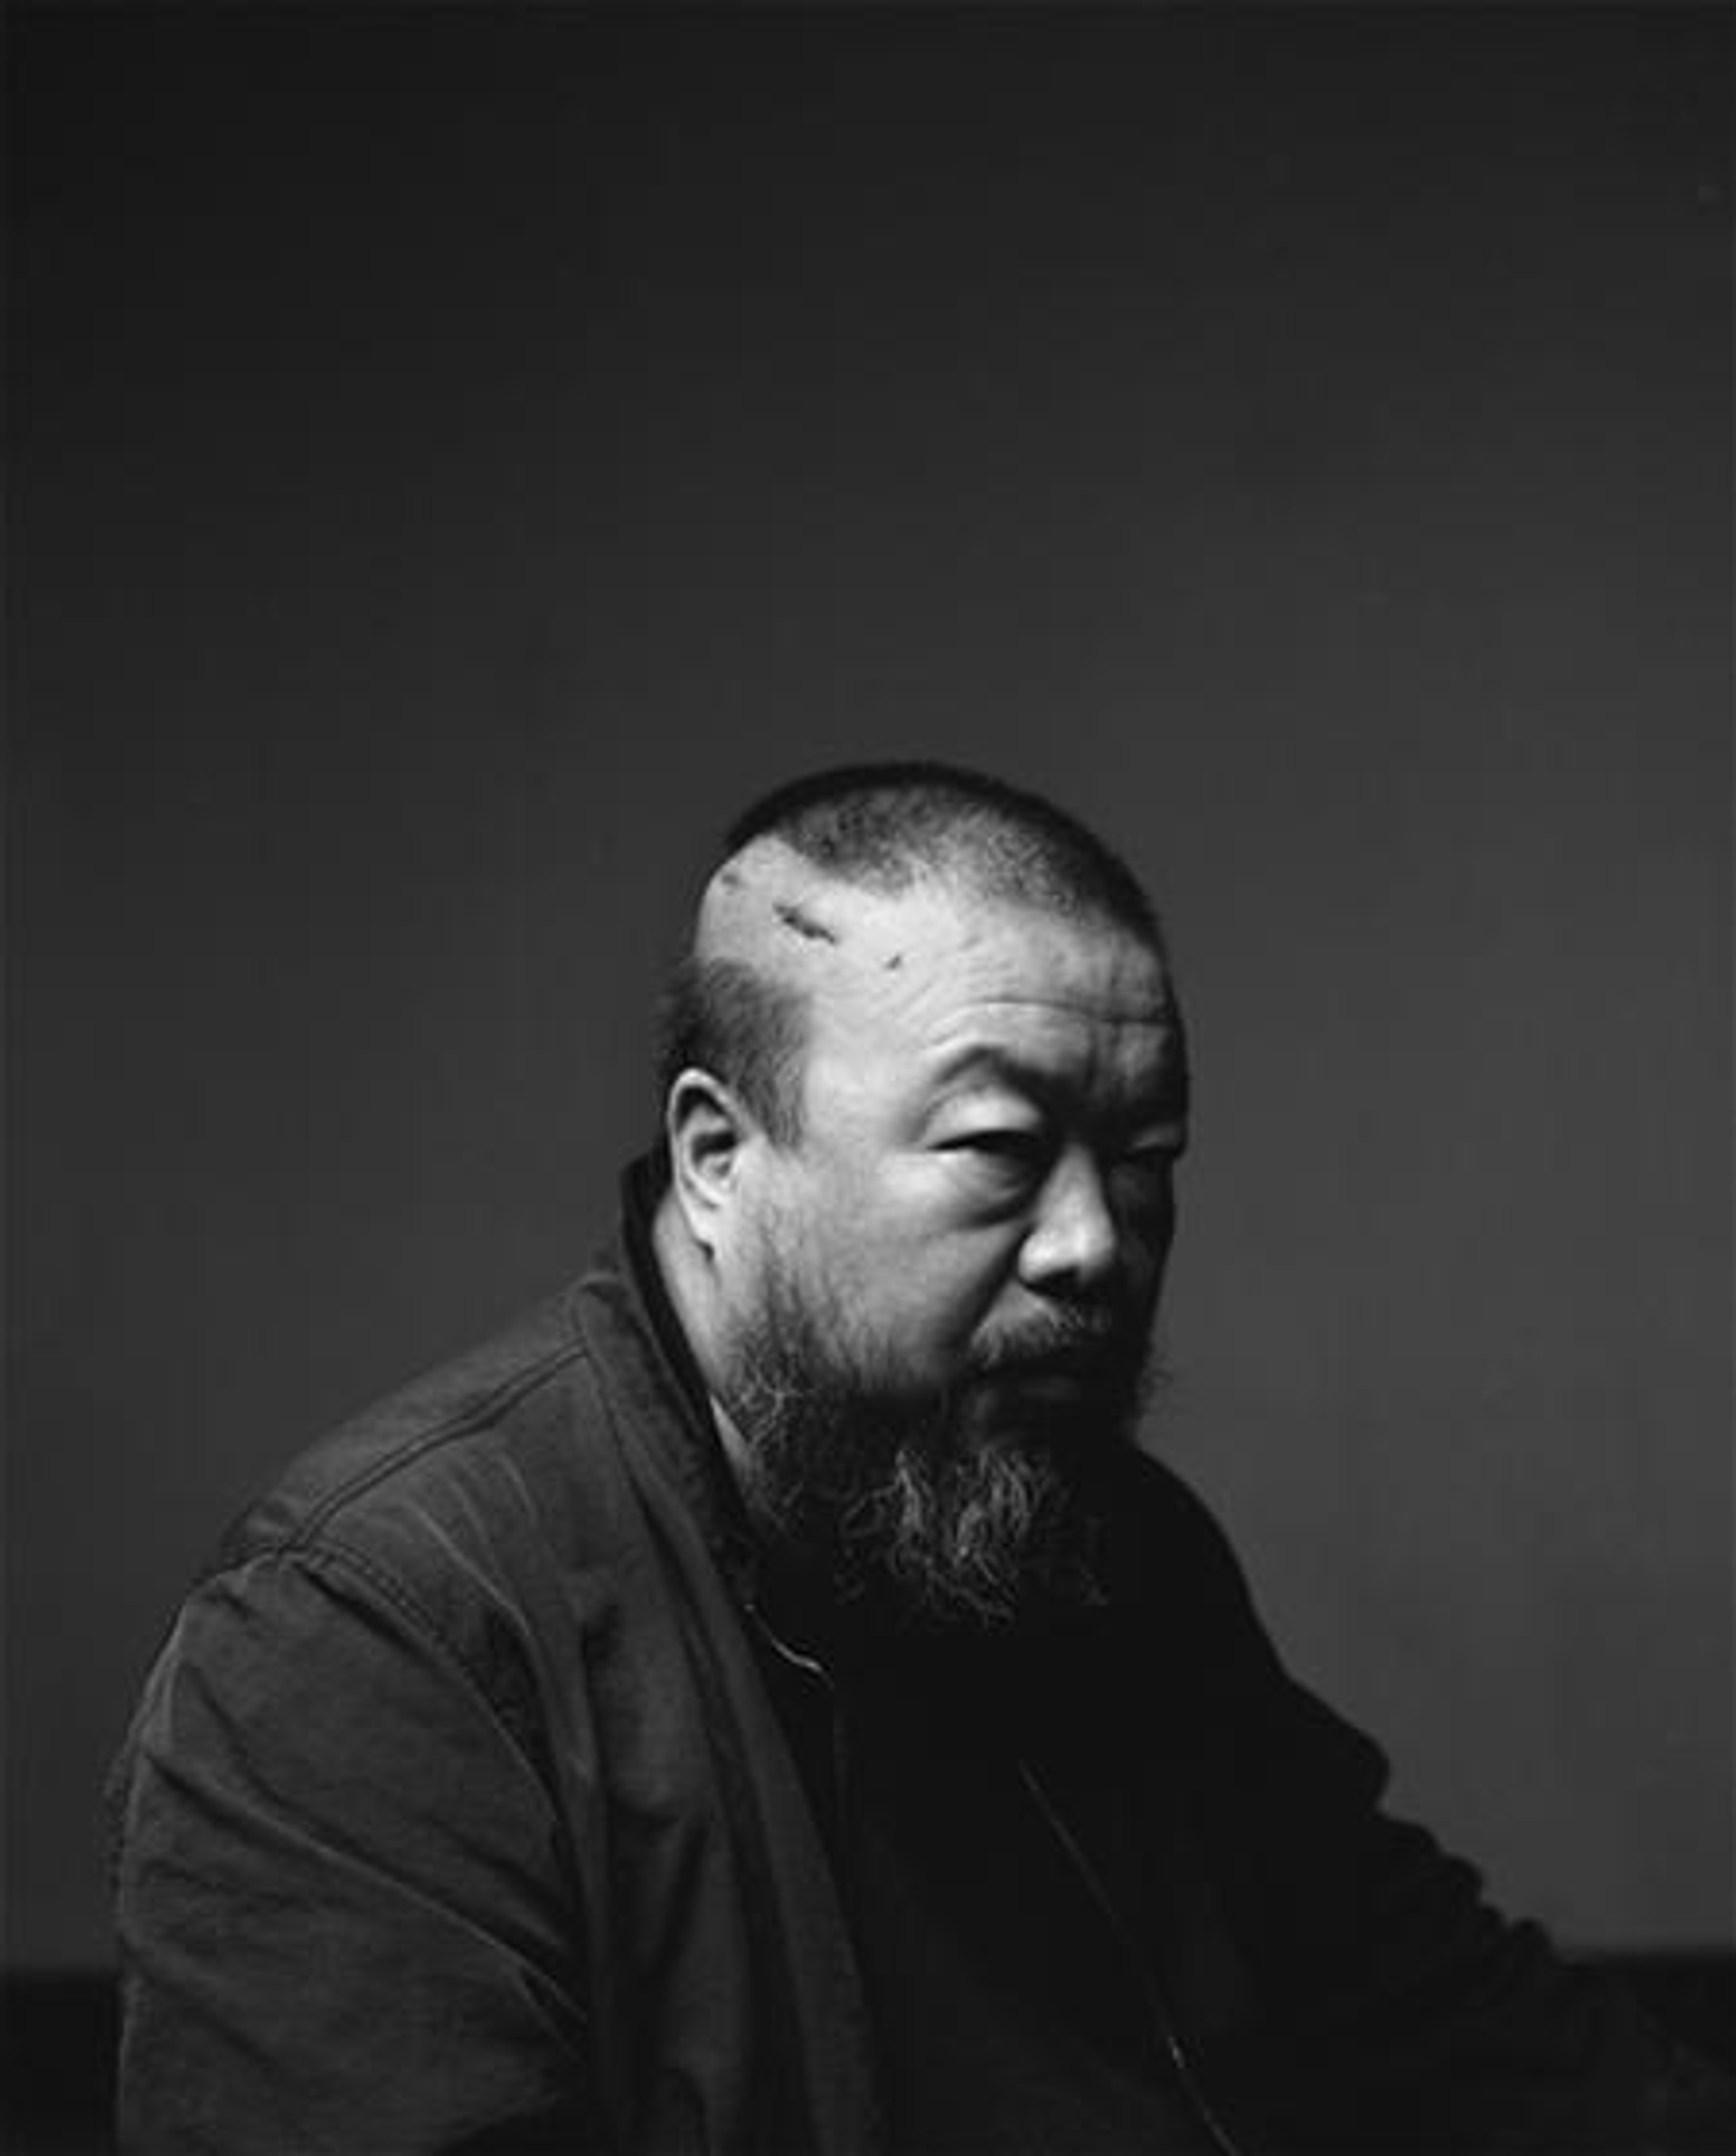 Chinese contemporary artist Ai Weiwei photographed in black and white with a scar on his head exposed